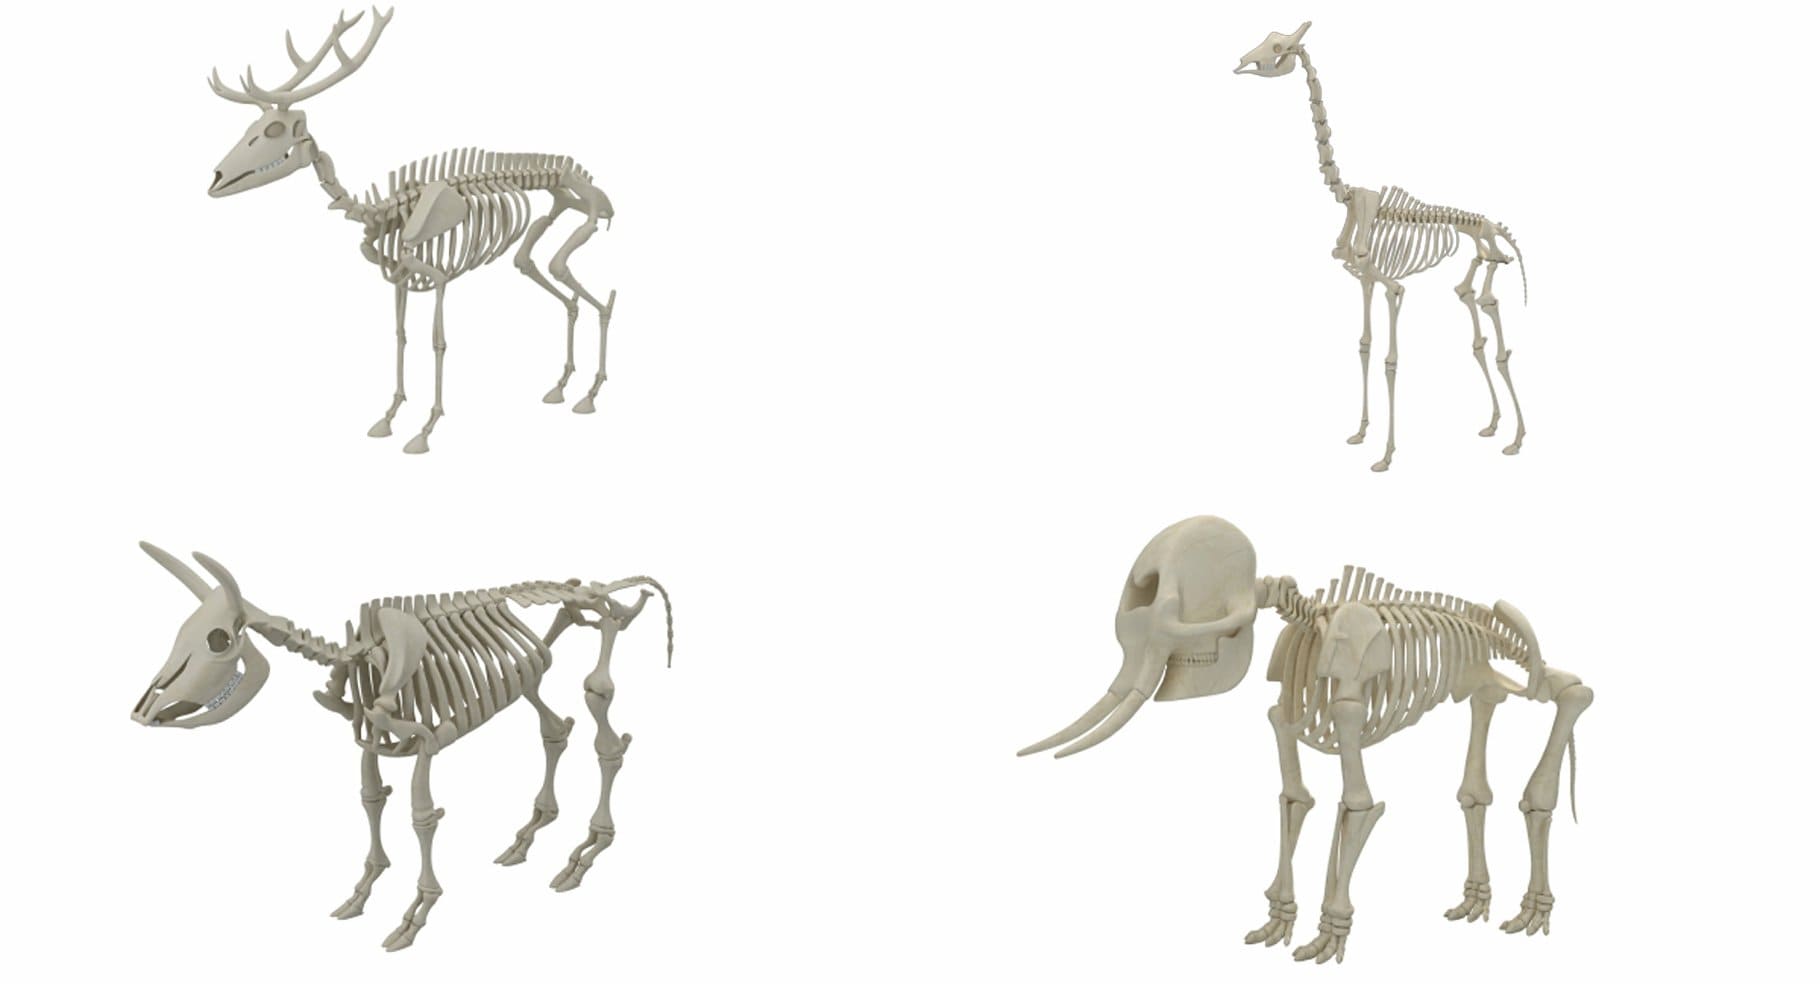 Images of skeletons of wild animals.